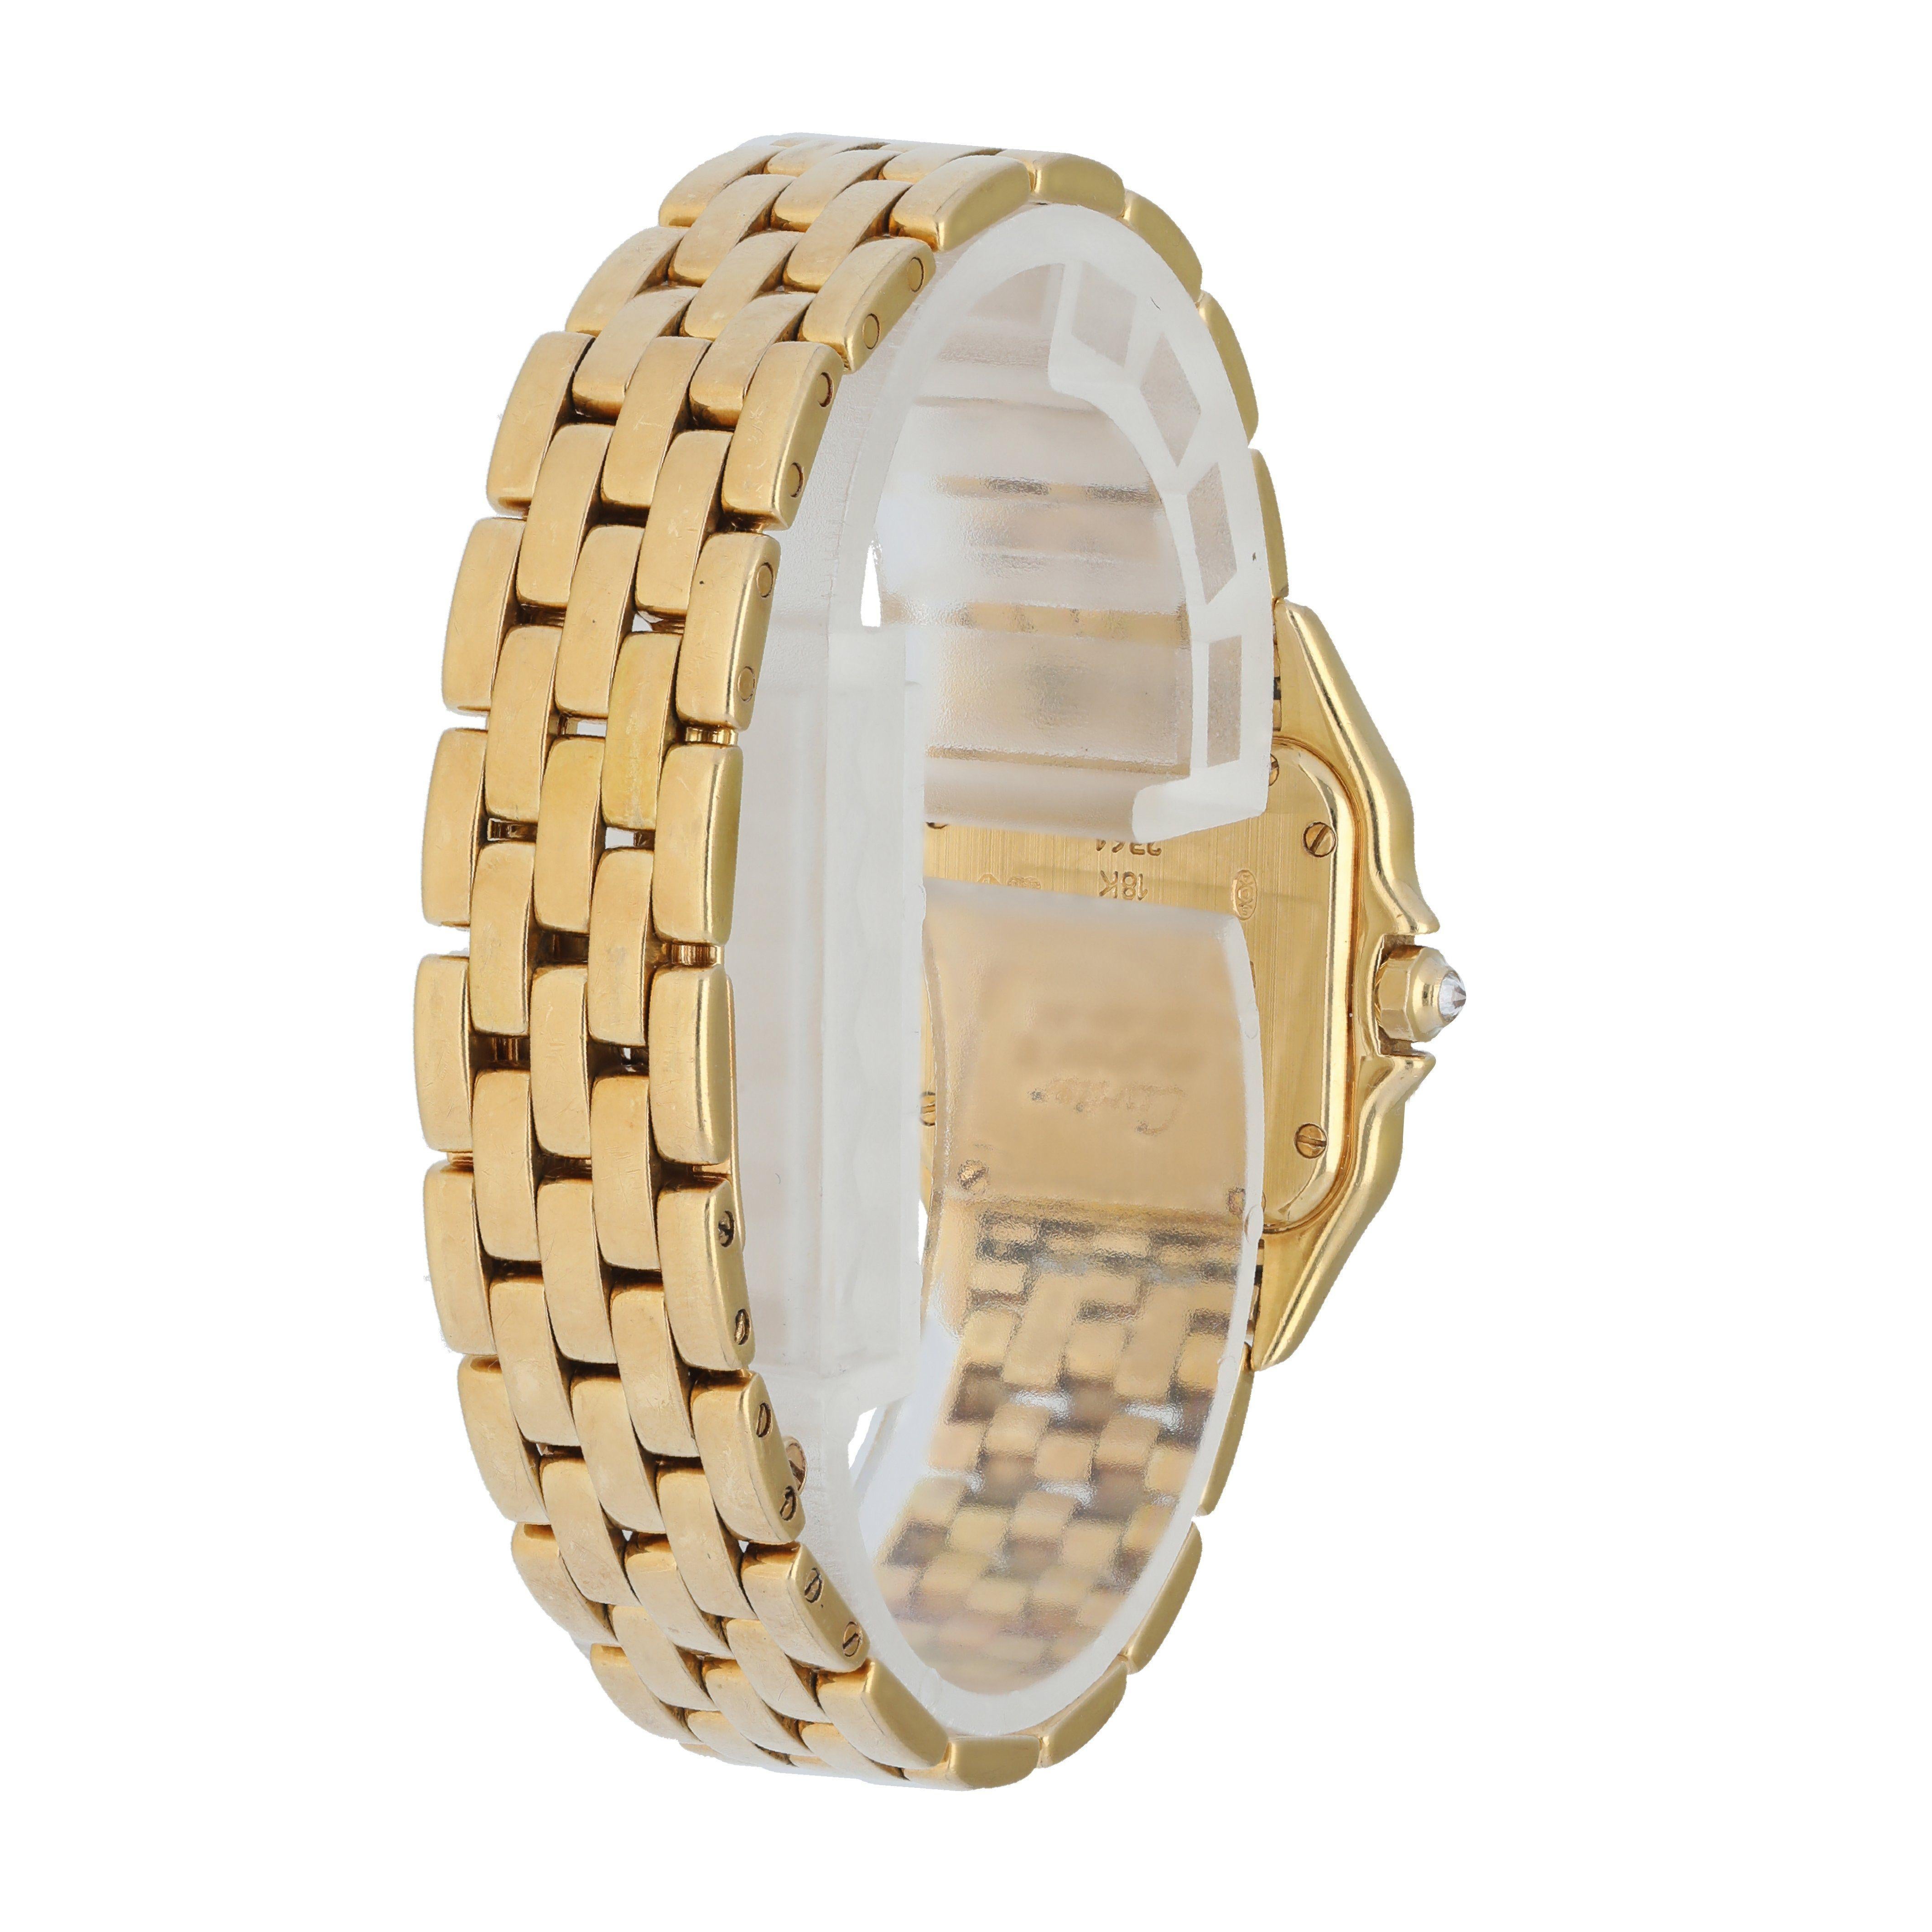 Cartier Panthere 2361 Mother of Pearl Dial Diamond Ladies Watch In Excellent Condition For Sale In New York, NY